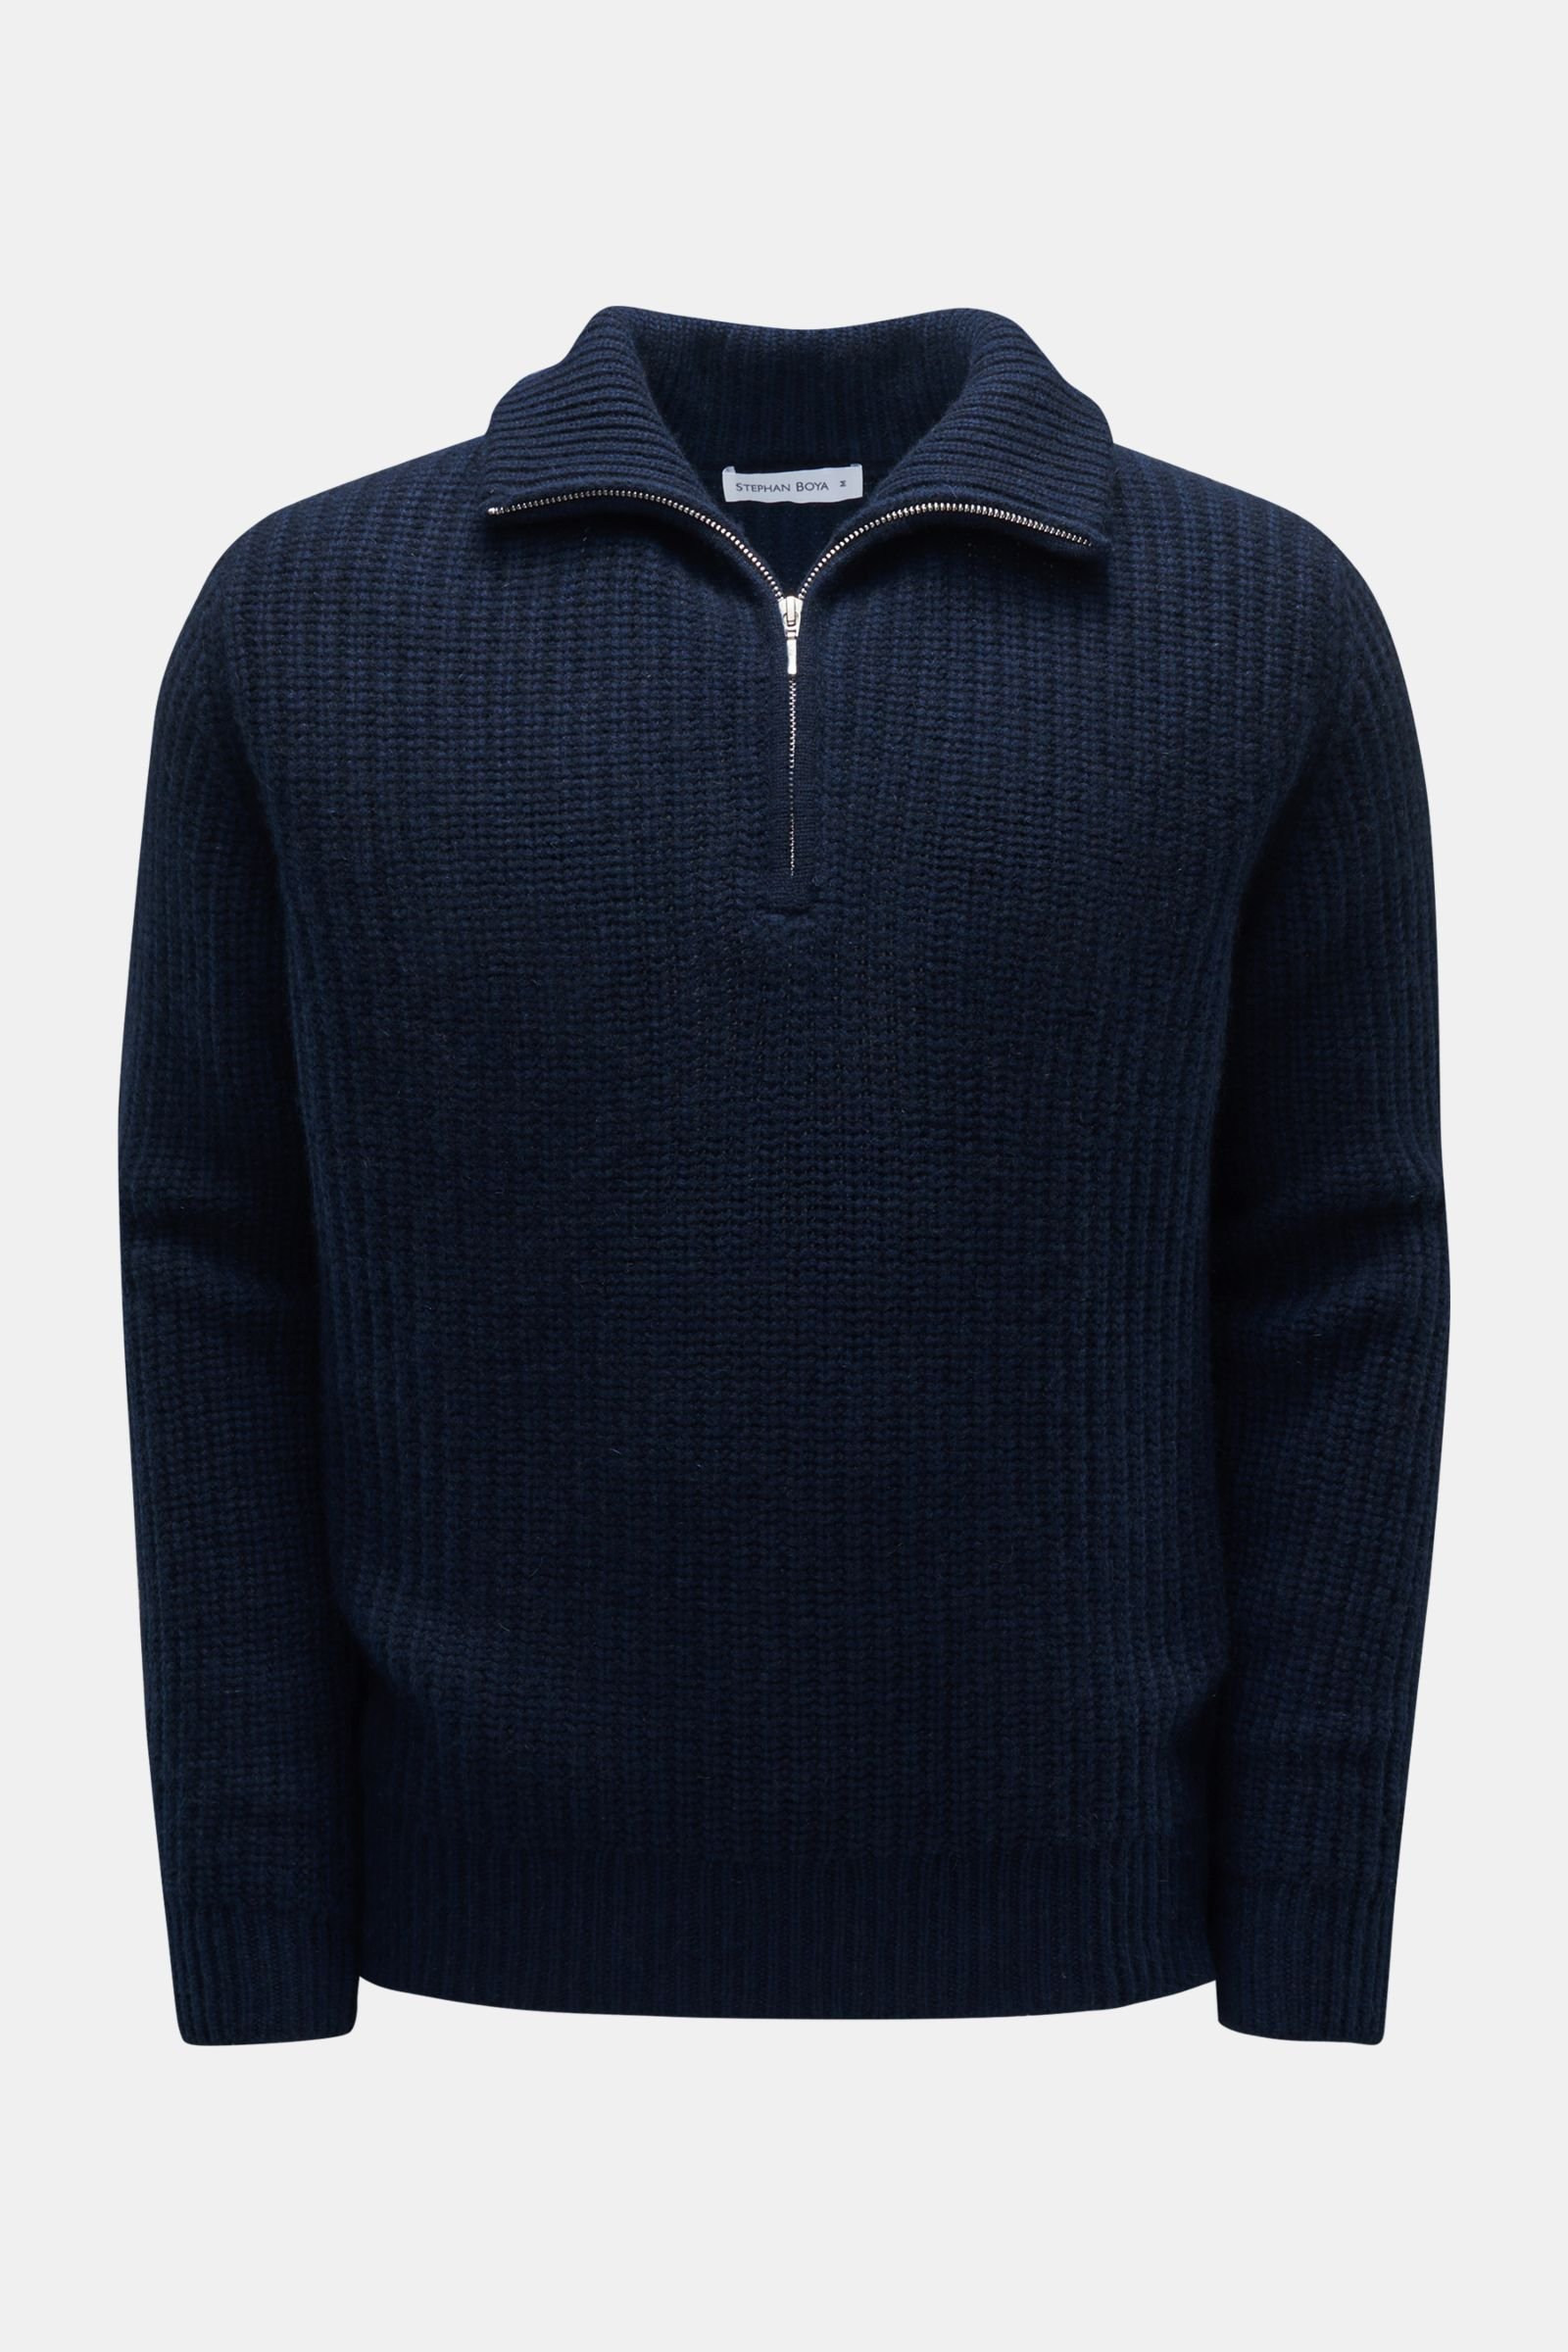 Cashmere Troyer 'Phil' navy